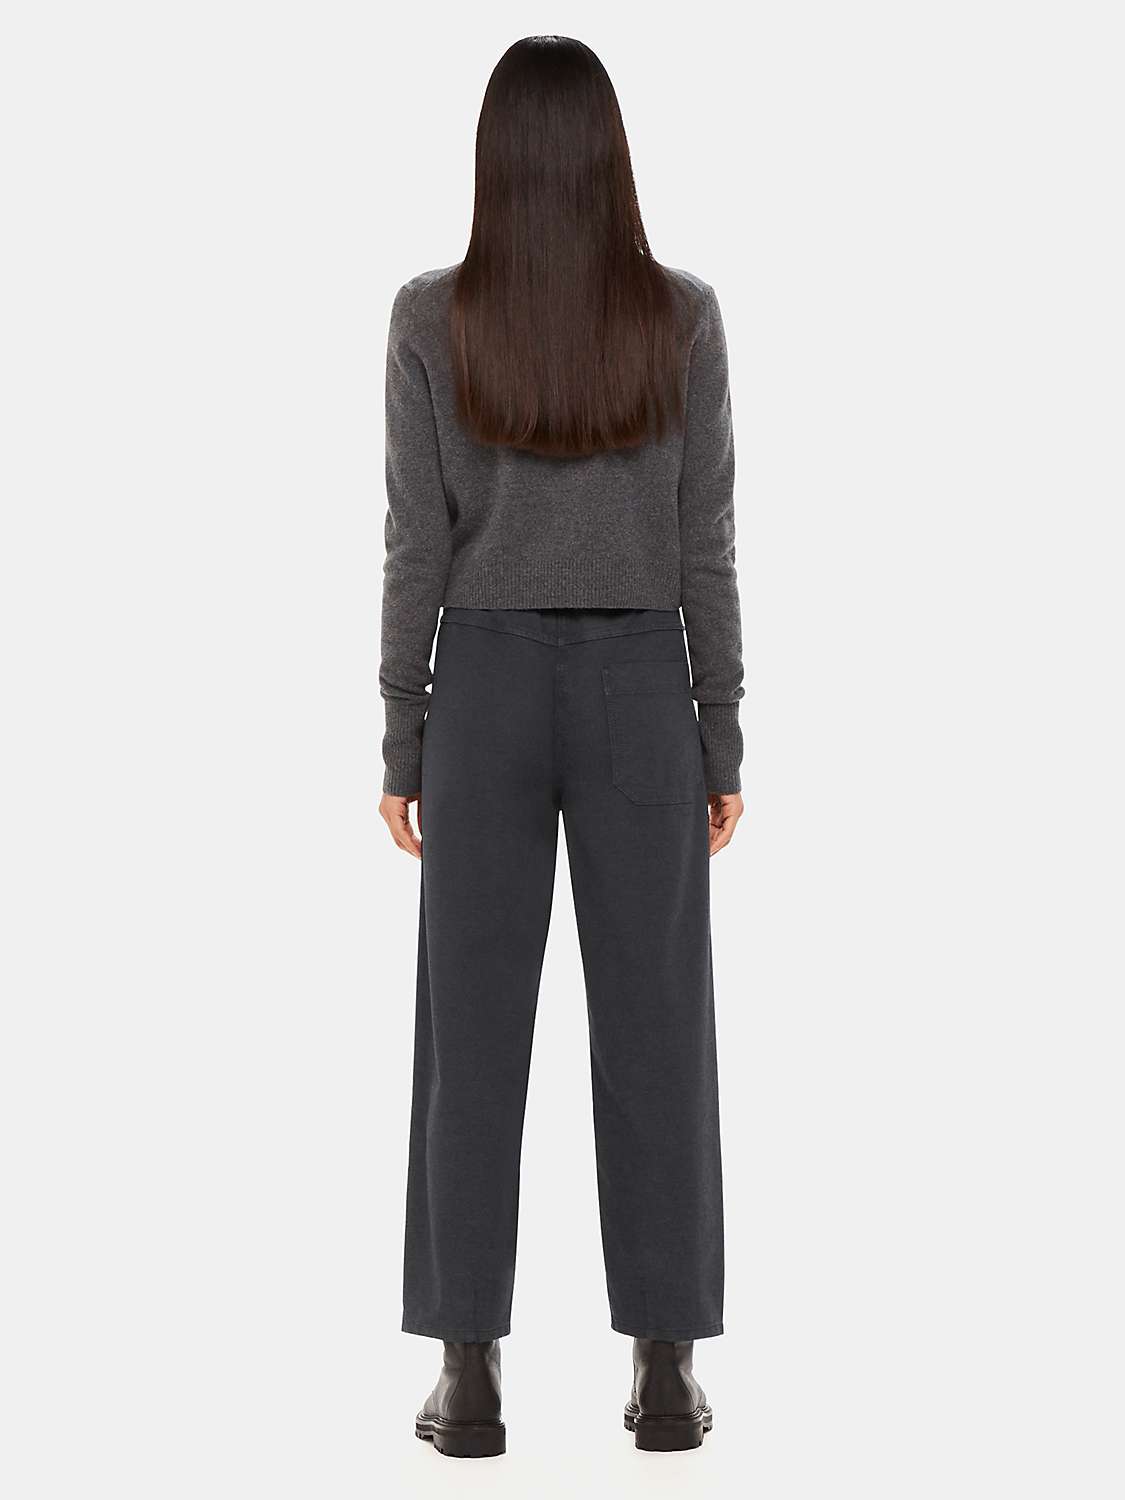 Buy Whistles Petite Tessa Casual Trousers, Black Online at johnlewis.com